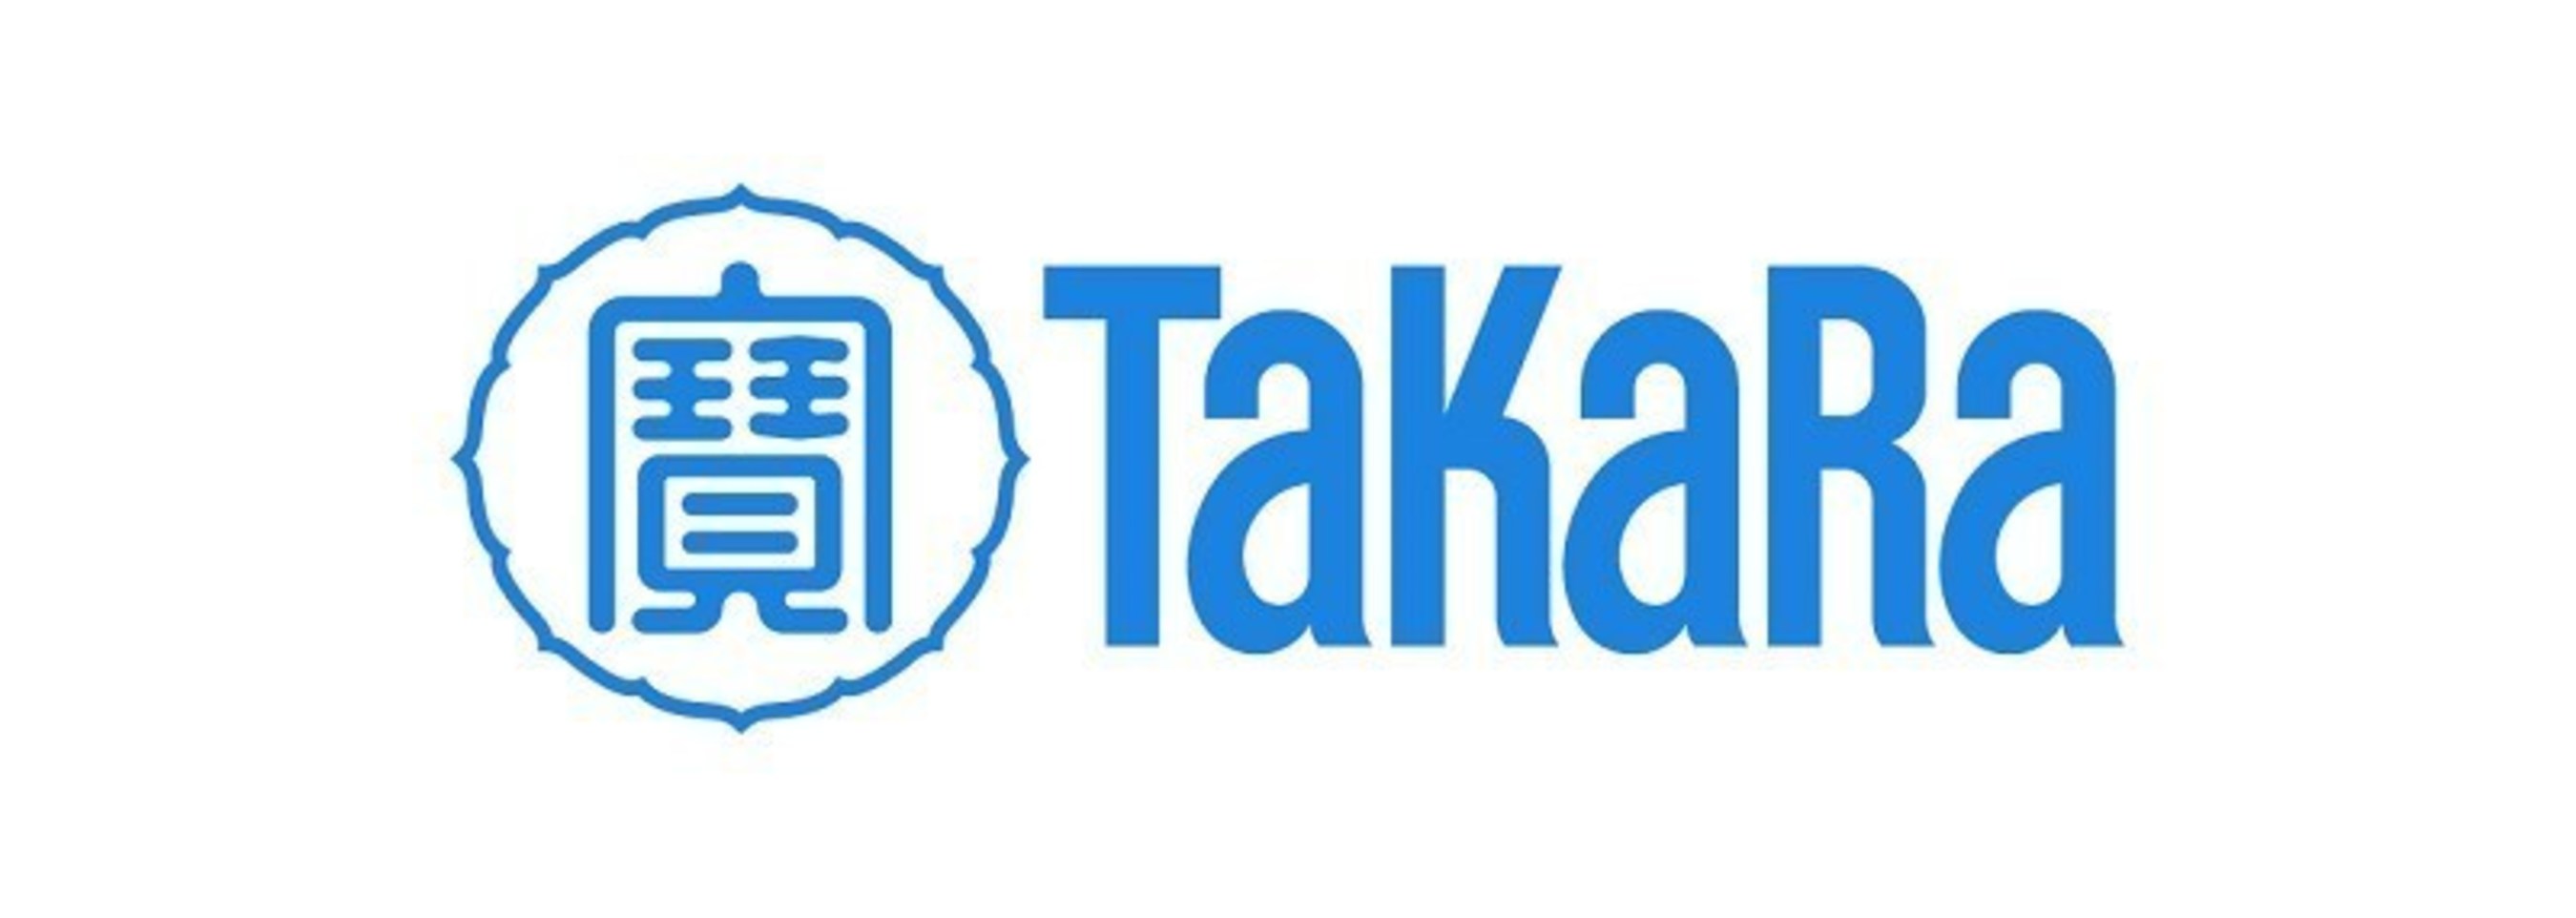 Takara Bio USA, Inc.(formerly Clontech Laboratories, Inc.), develops, manufactures, and distributes a wide range of life science research reagents under the Takara (R), Clontech(R) and Cellartis(R) brands. Learn more at http://www.clontech.com/